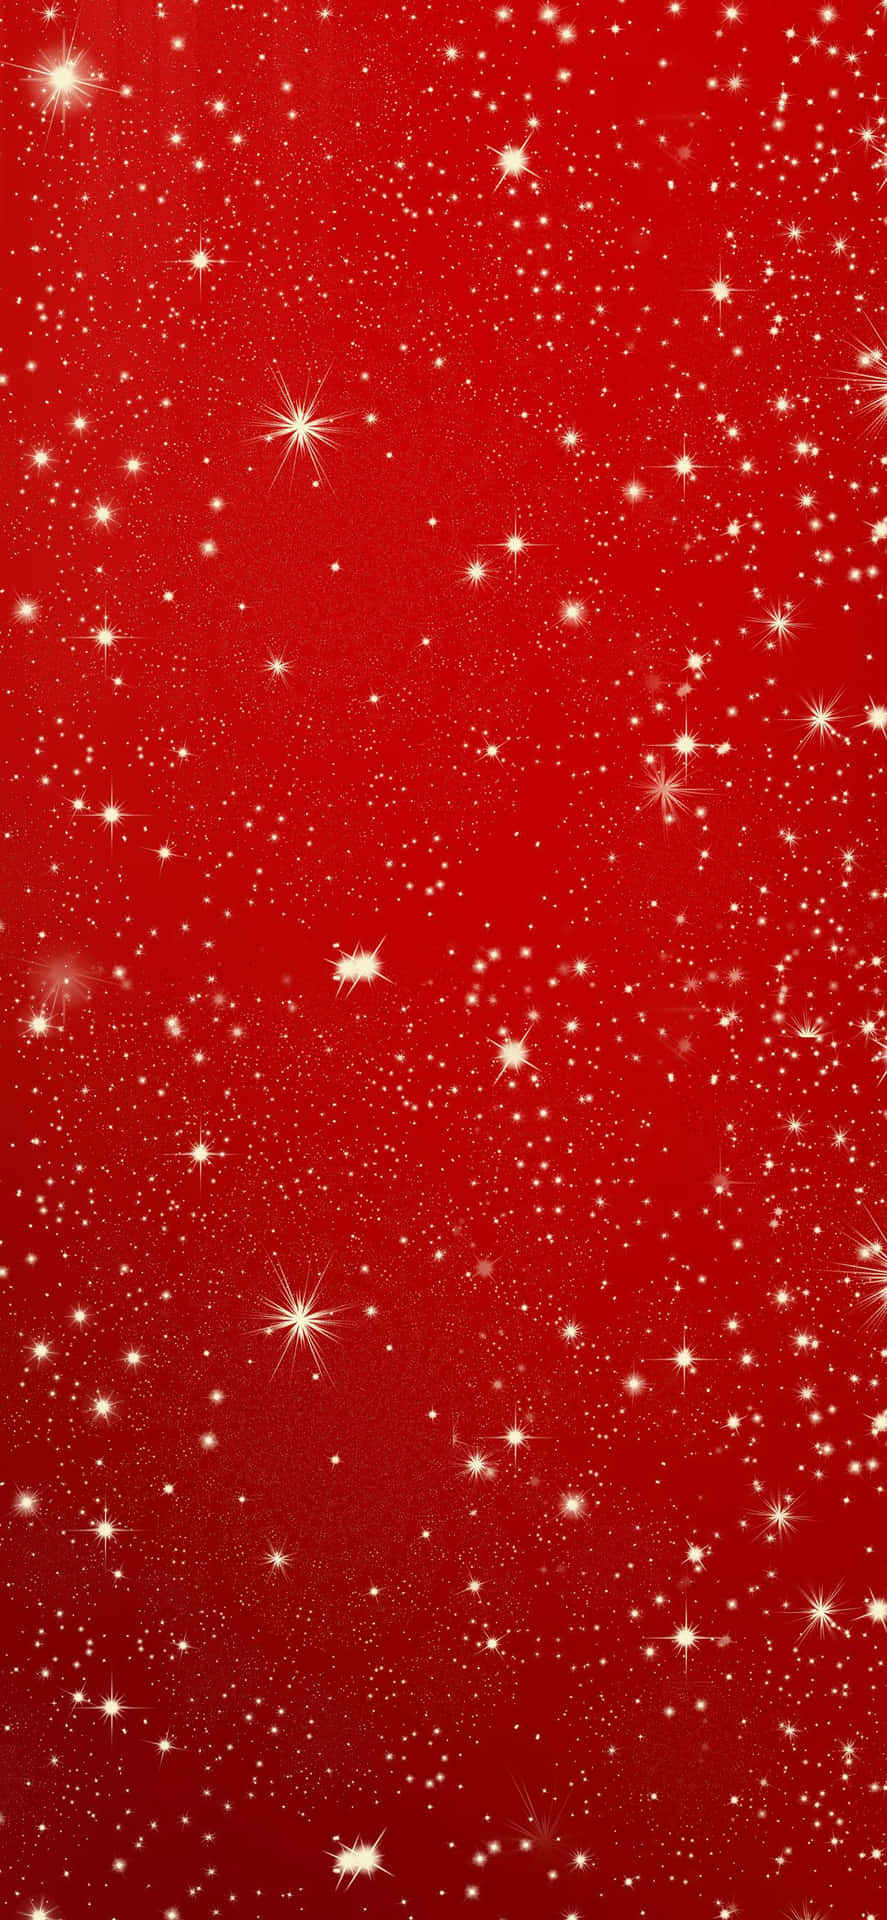 Glowy Red Christmas Iphone Wallpaper